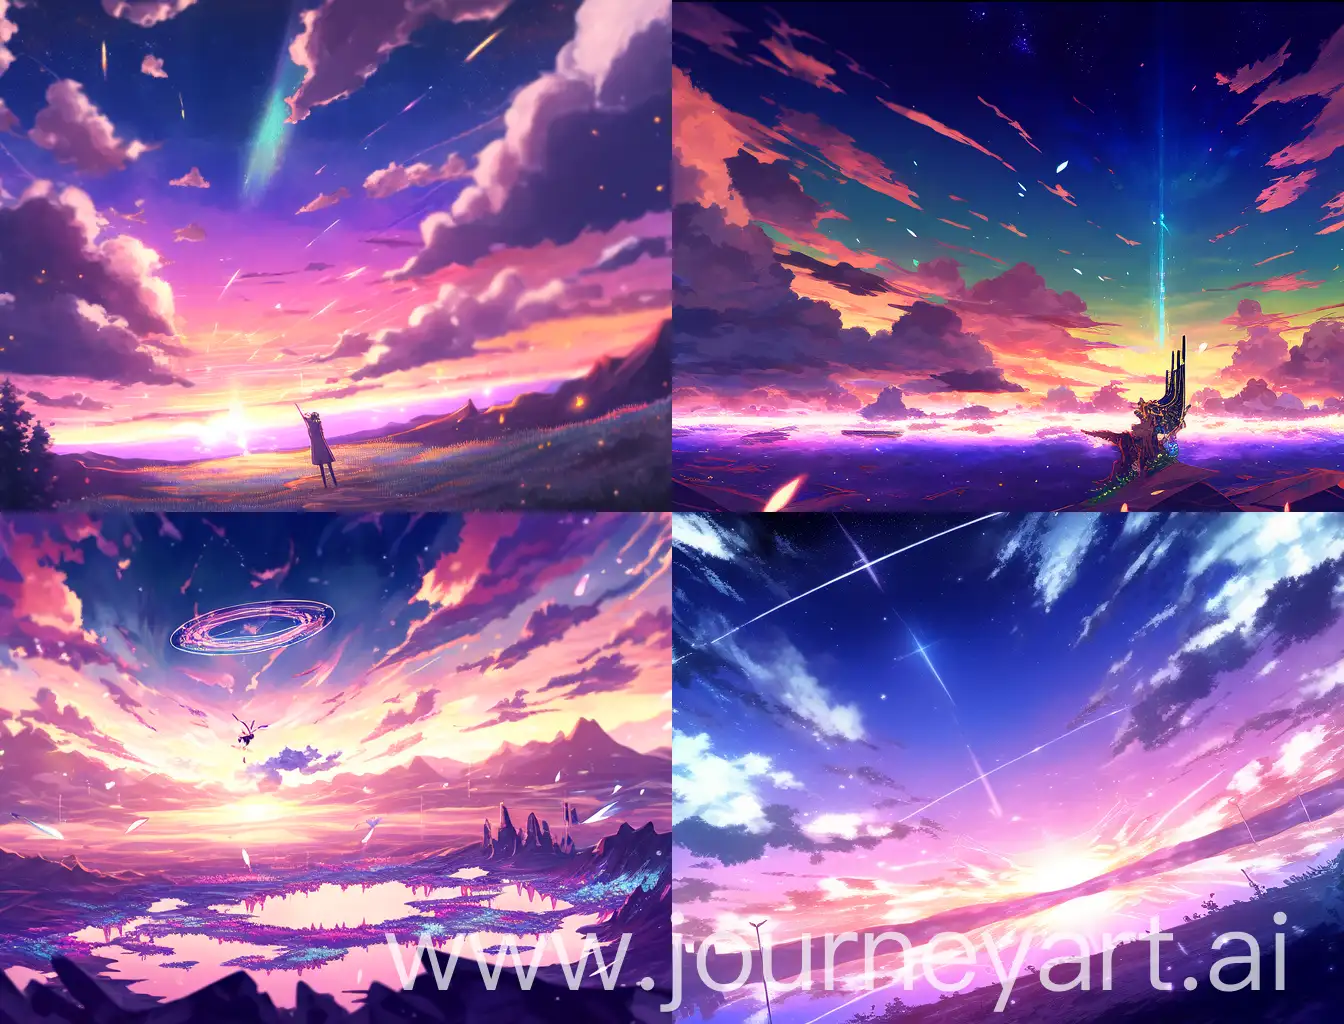 Anime-Style-Awakening-to-a-Fractured-Magical-Sky-and-Unfamiliar-Landscape